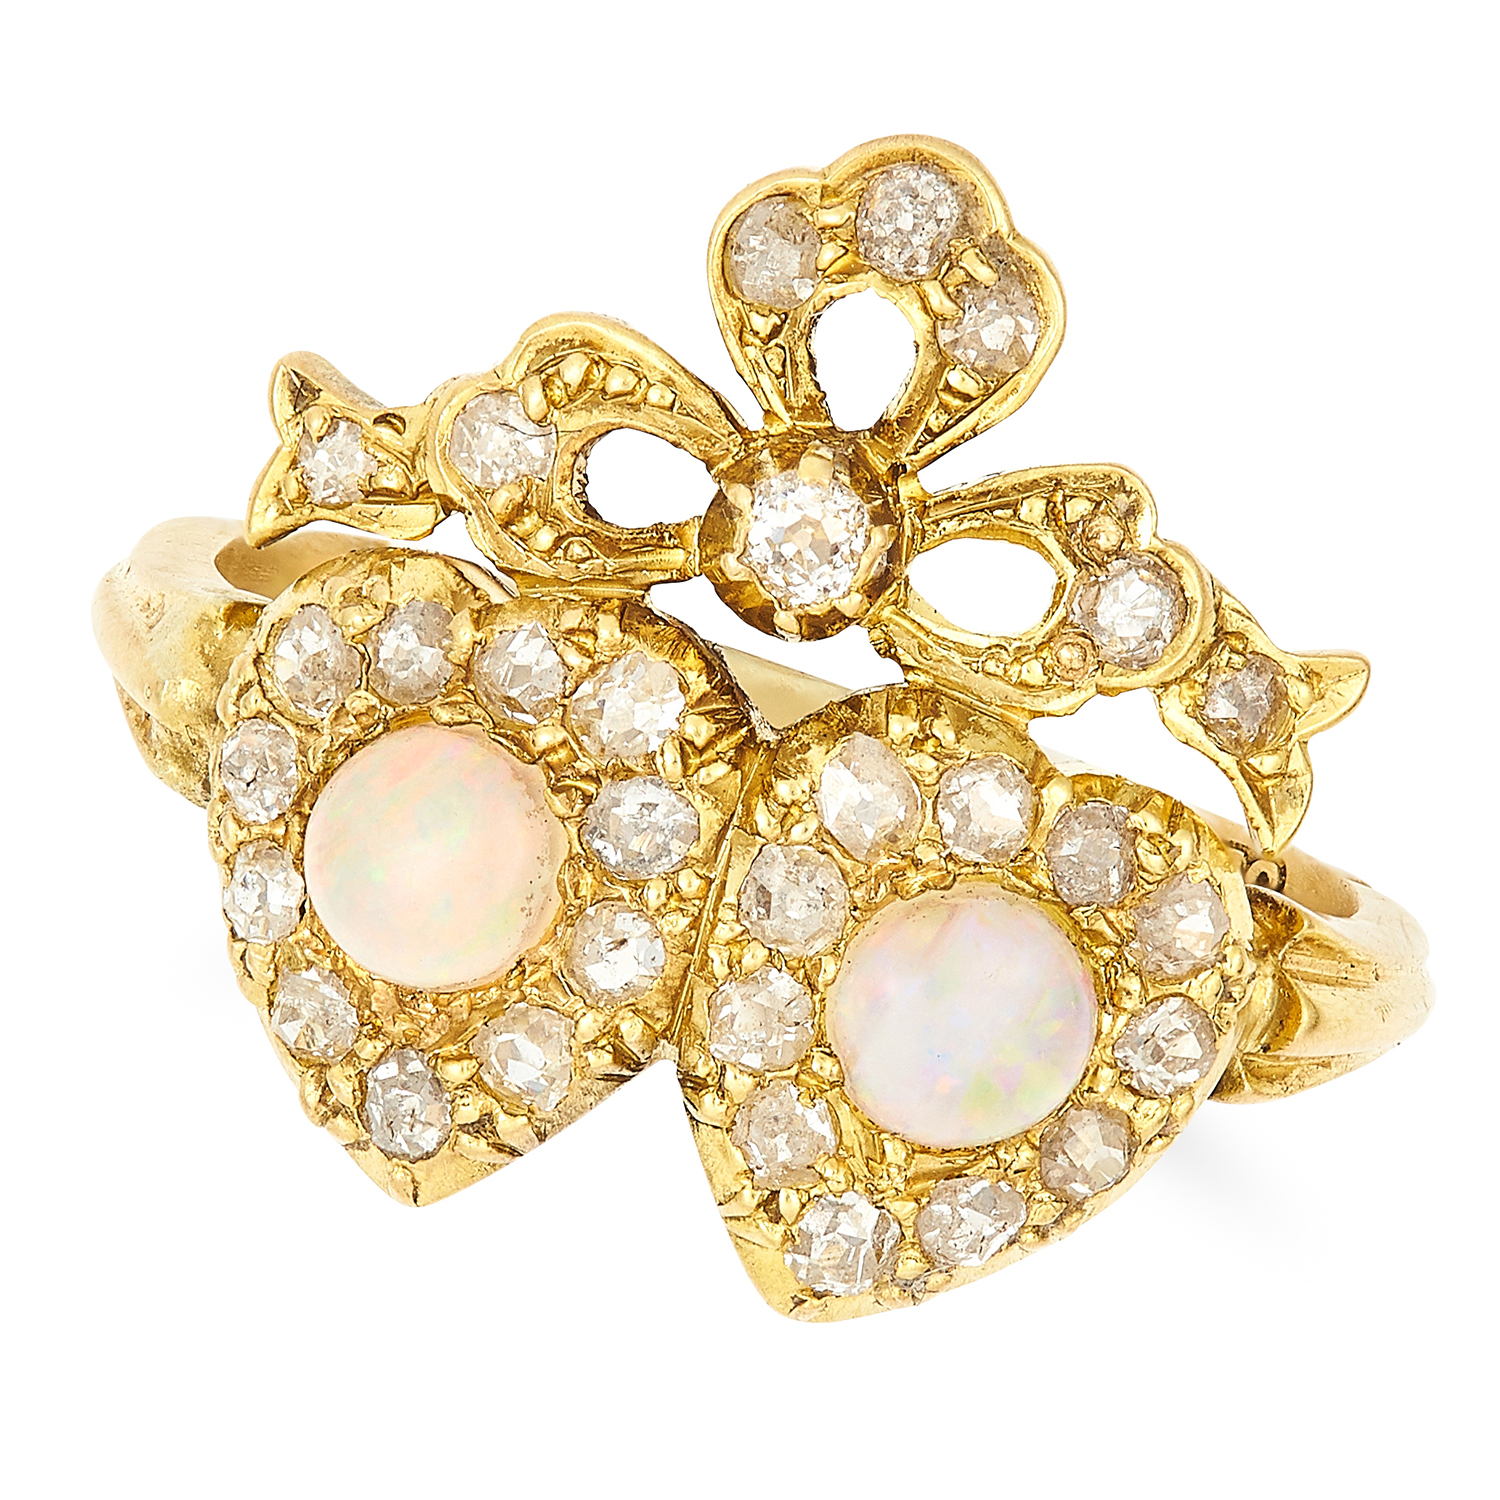 OPAL AND DIAMOND SWEETHEART RING in 18ct yellow gold, set with cabochon opals and old cut